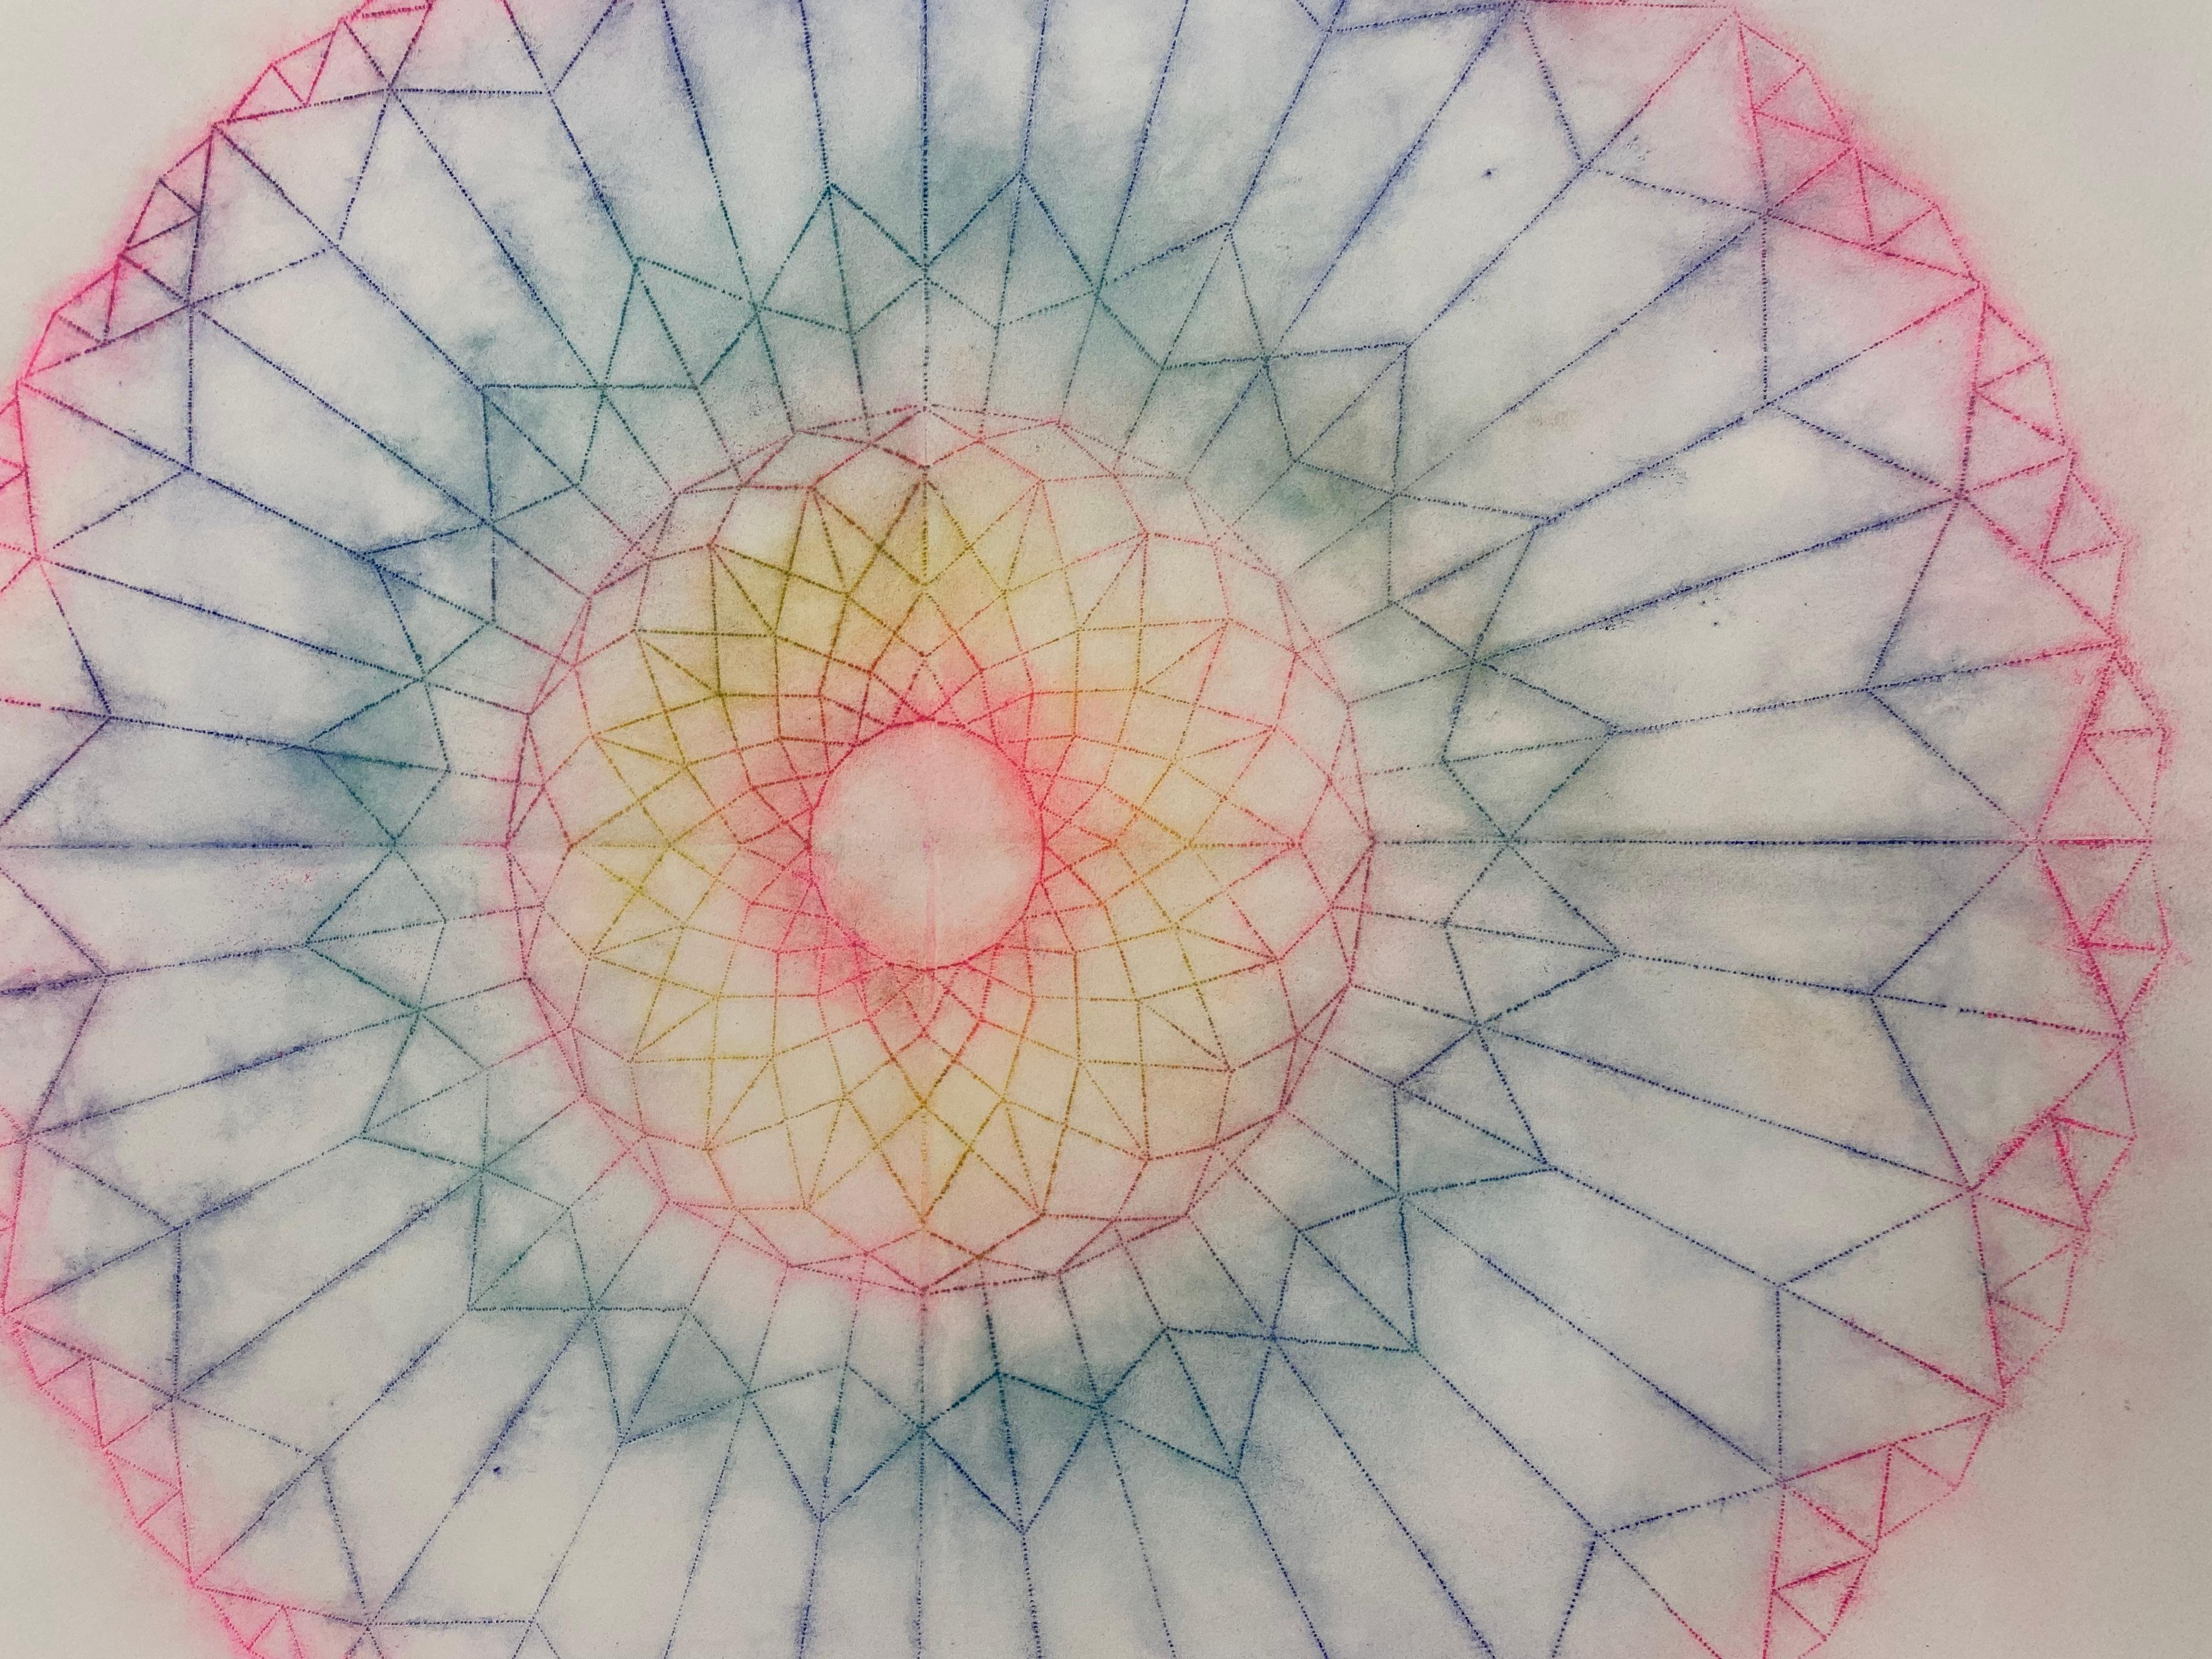 This multicolored drawing has a beautiful, soft mottled texture created with Judge's unique powered pigment technique. Primavera Pop 5 is a geometric flower mandala shape with delicate lines in bright pink, yellow, dark green and violet blue. The